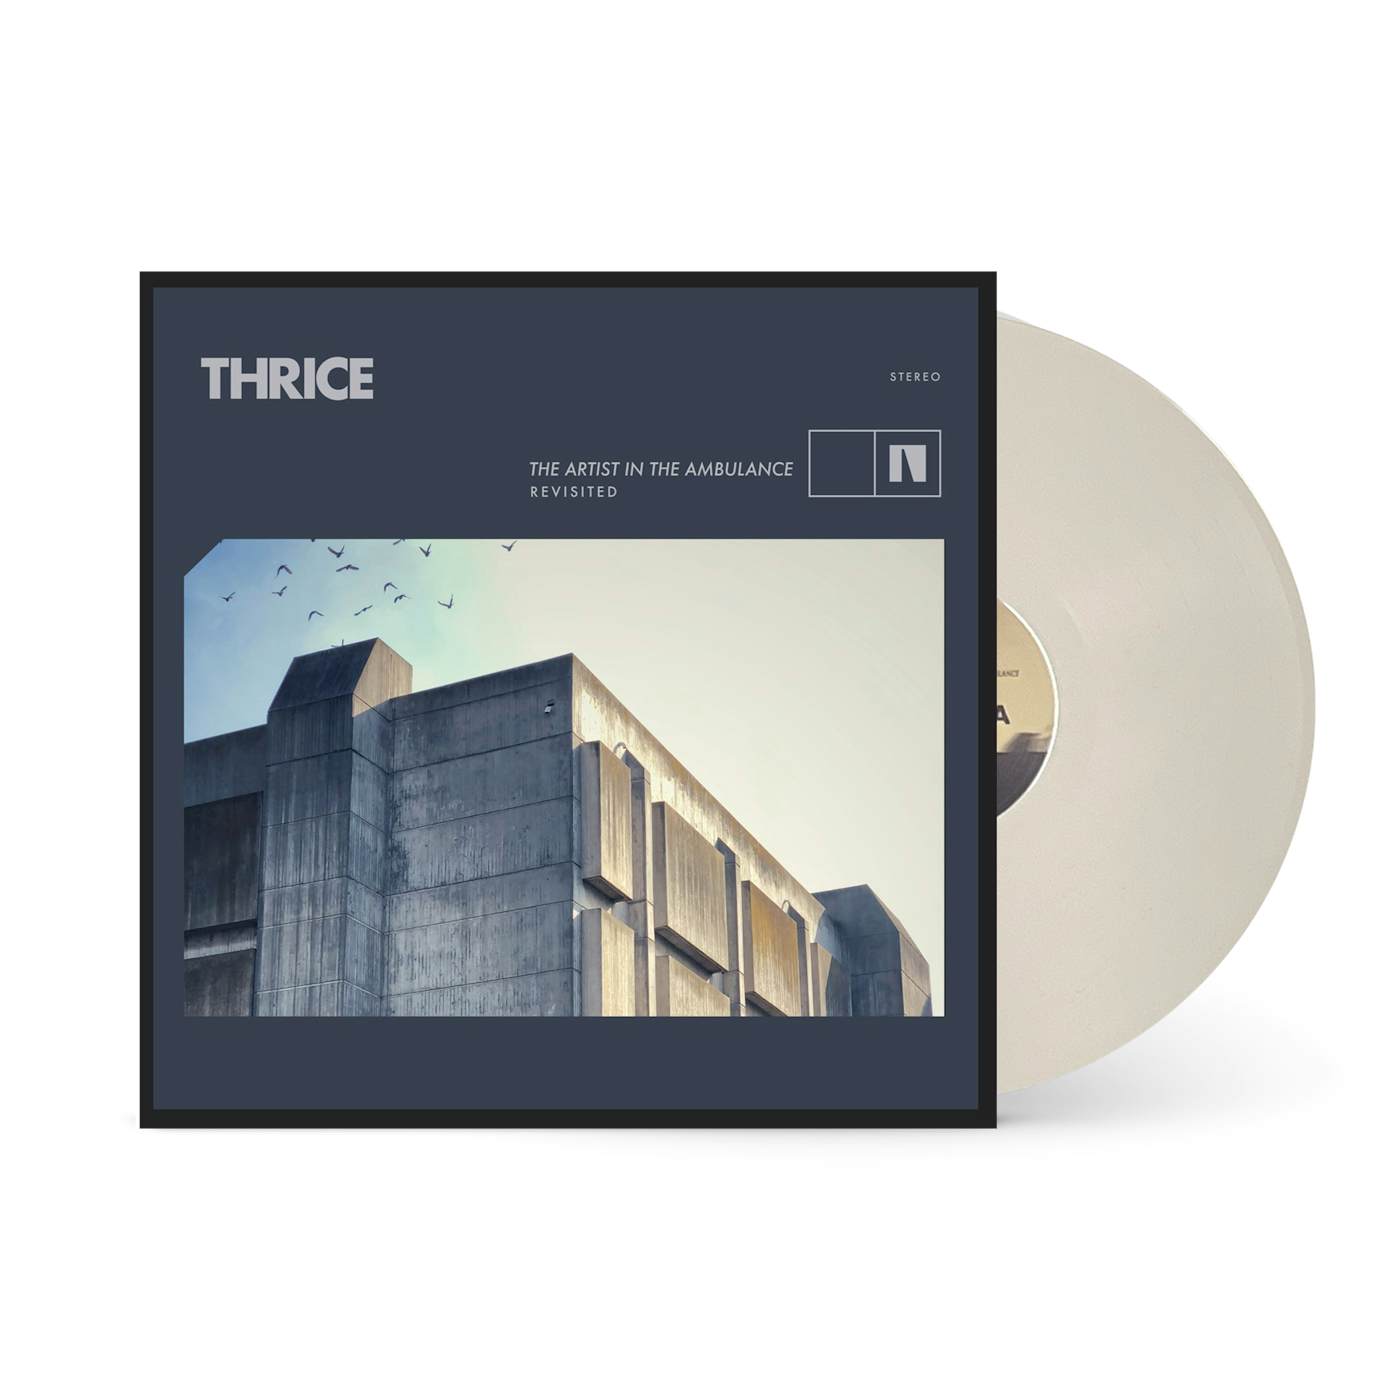 Thrice - "The Artist In The Ambulance Revisited" LP (Vinyl)